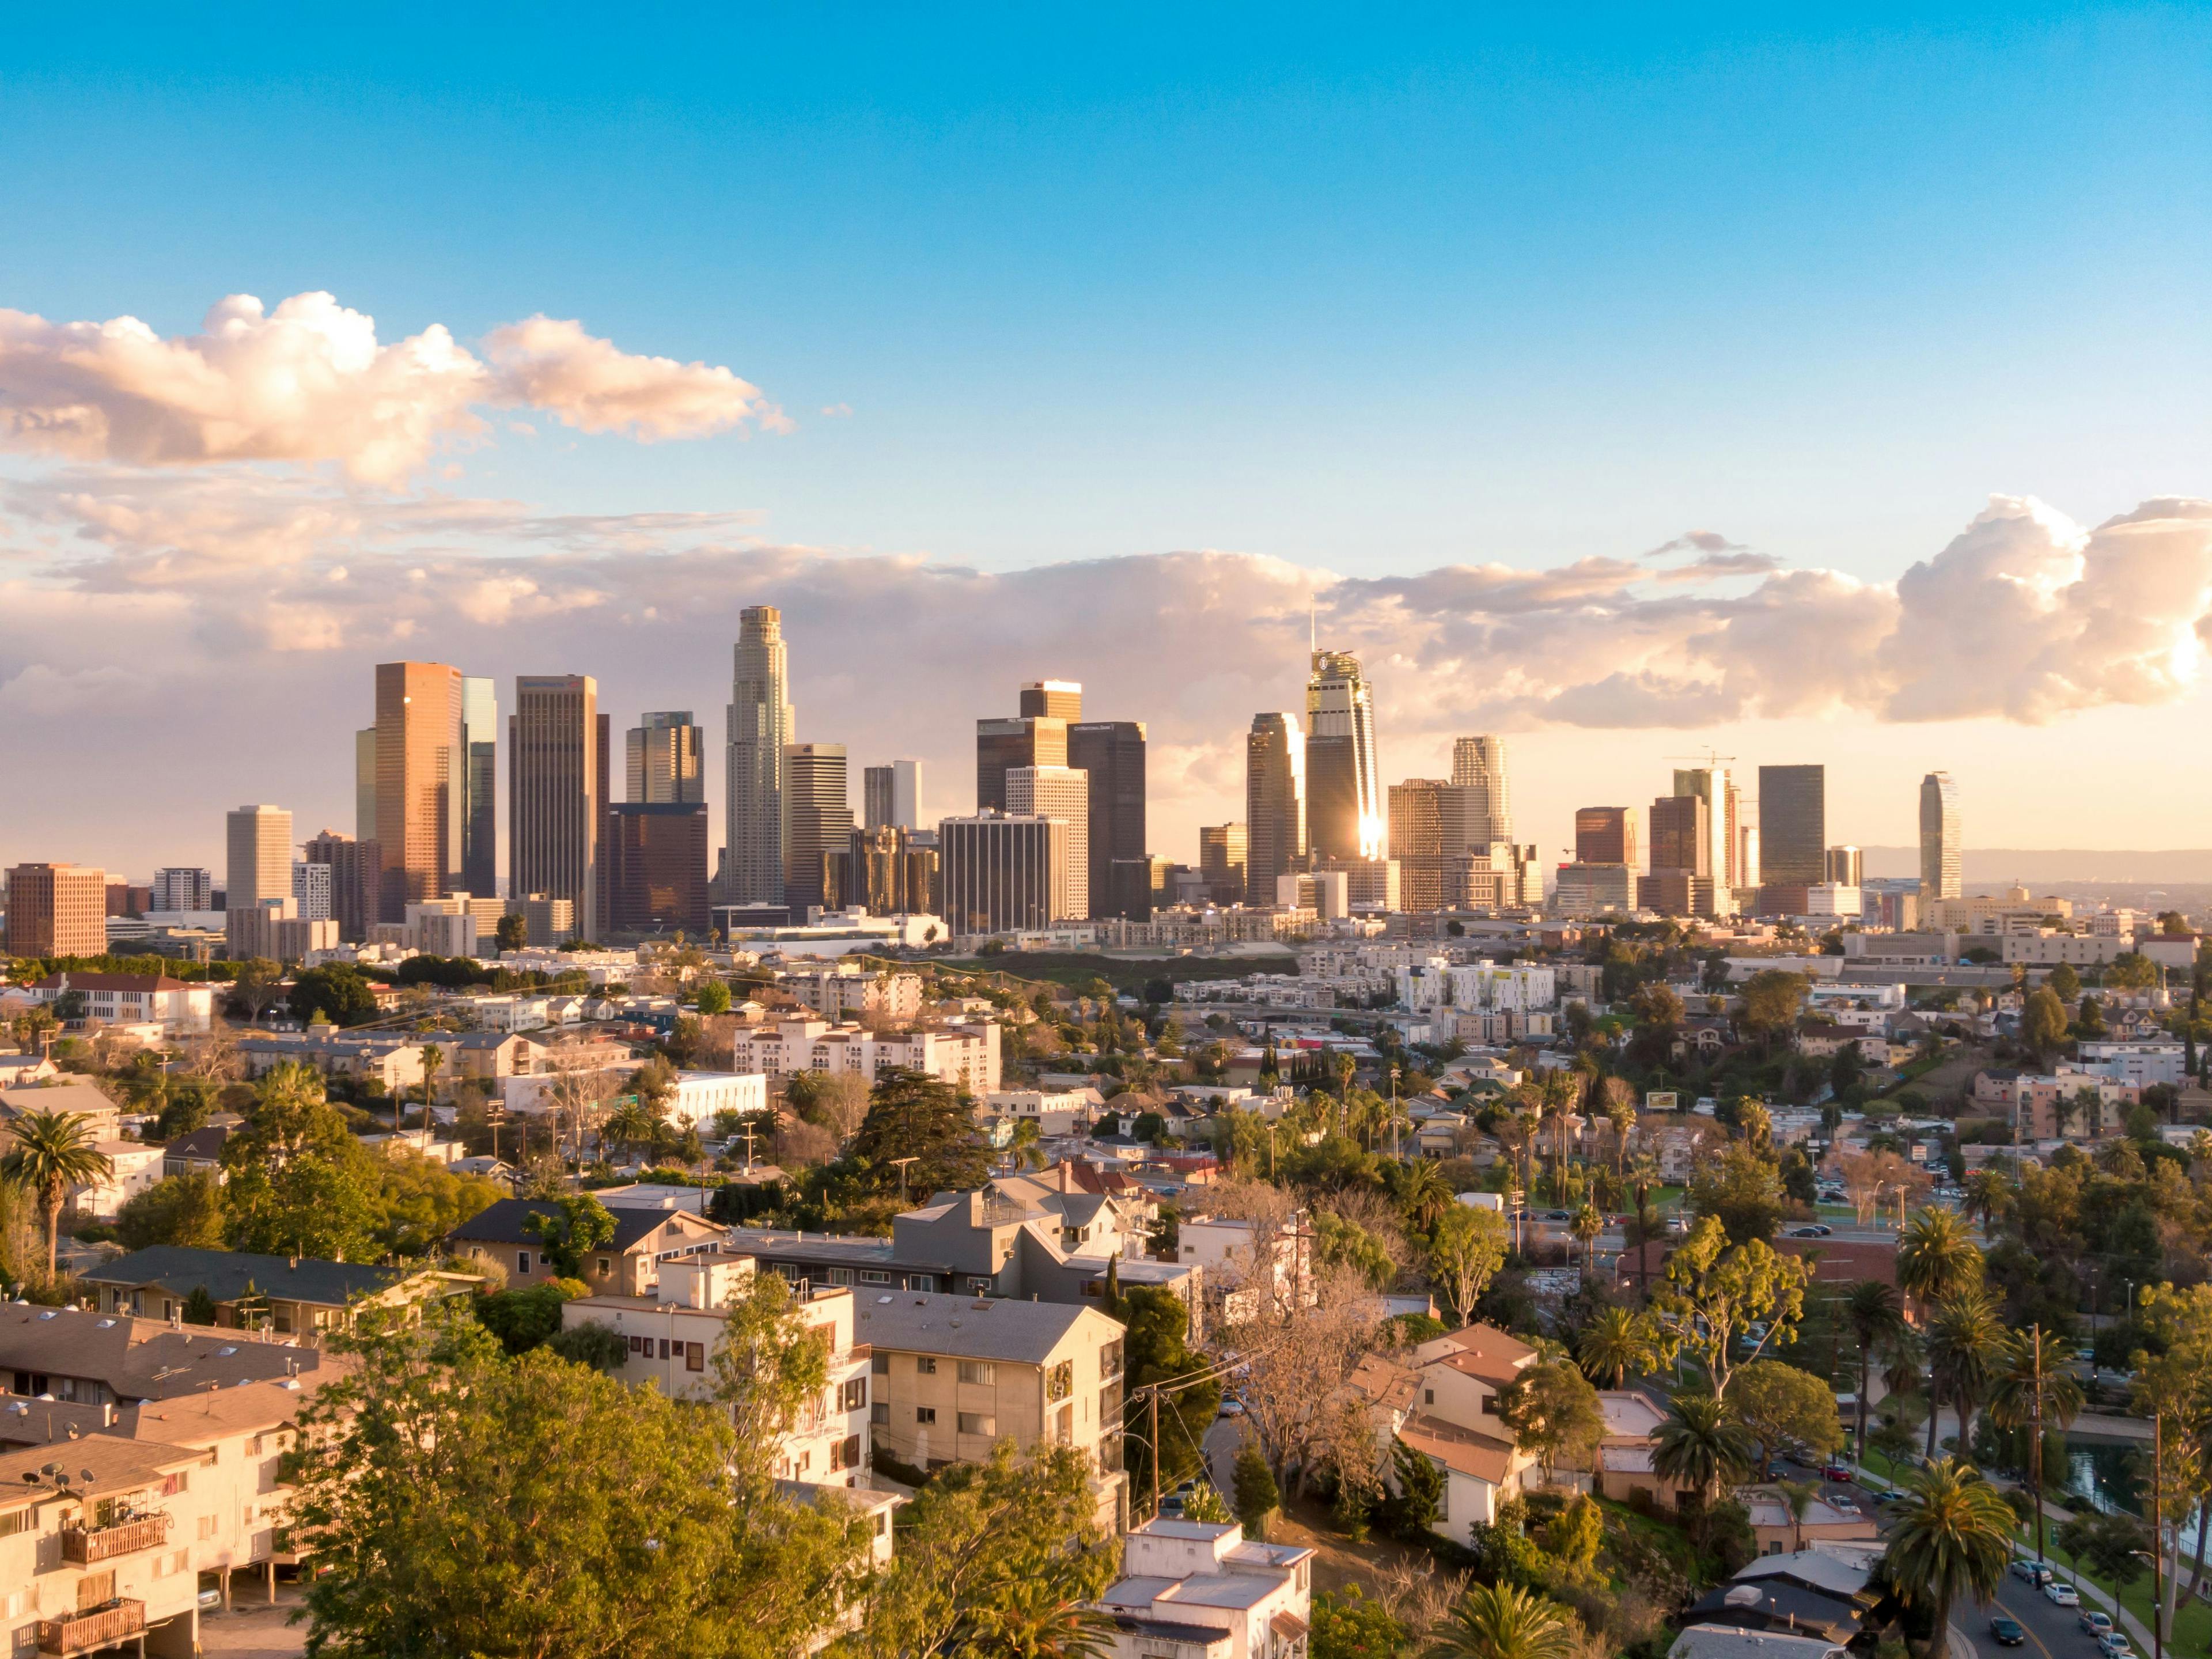 Aerial view of downtown Los Angeles city skyline and skyscrapers on a sunny day. | Image Credit: © Newport Coast Media - stock.adobe.com.